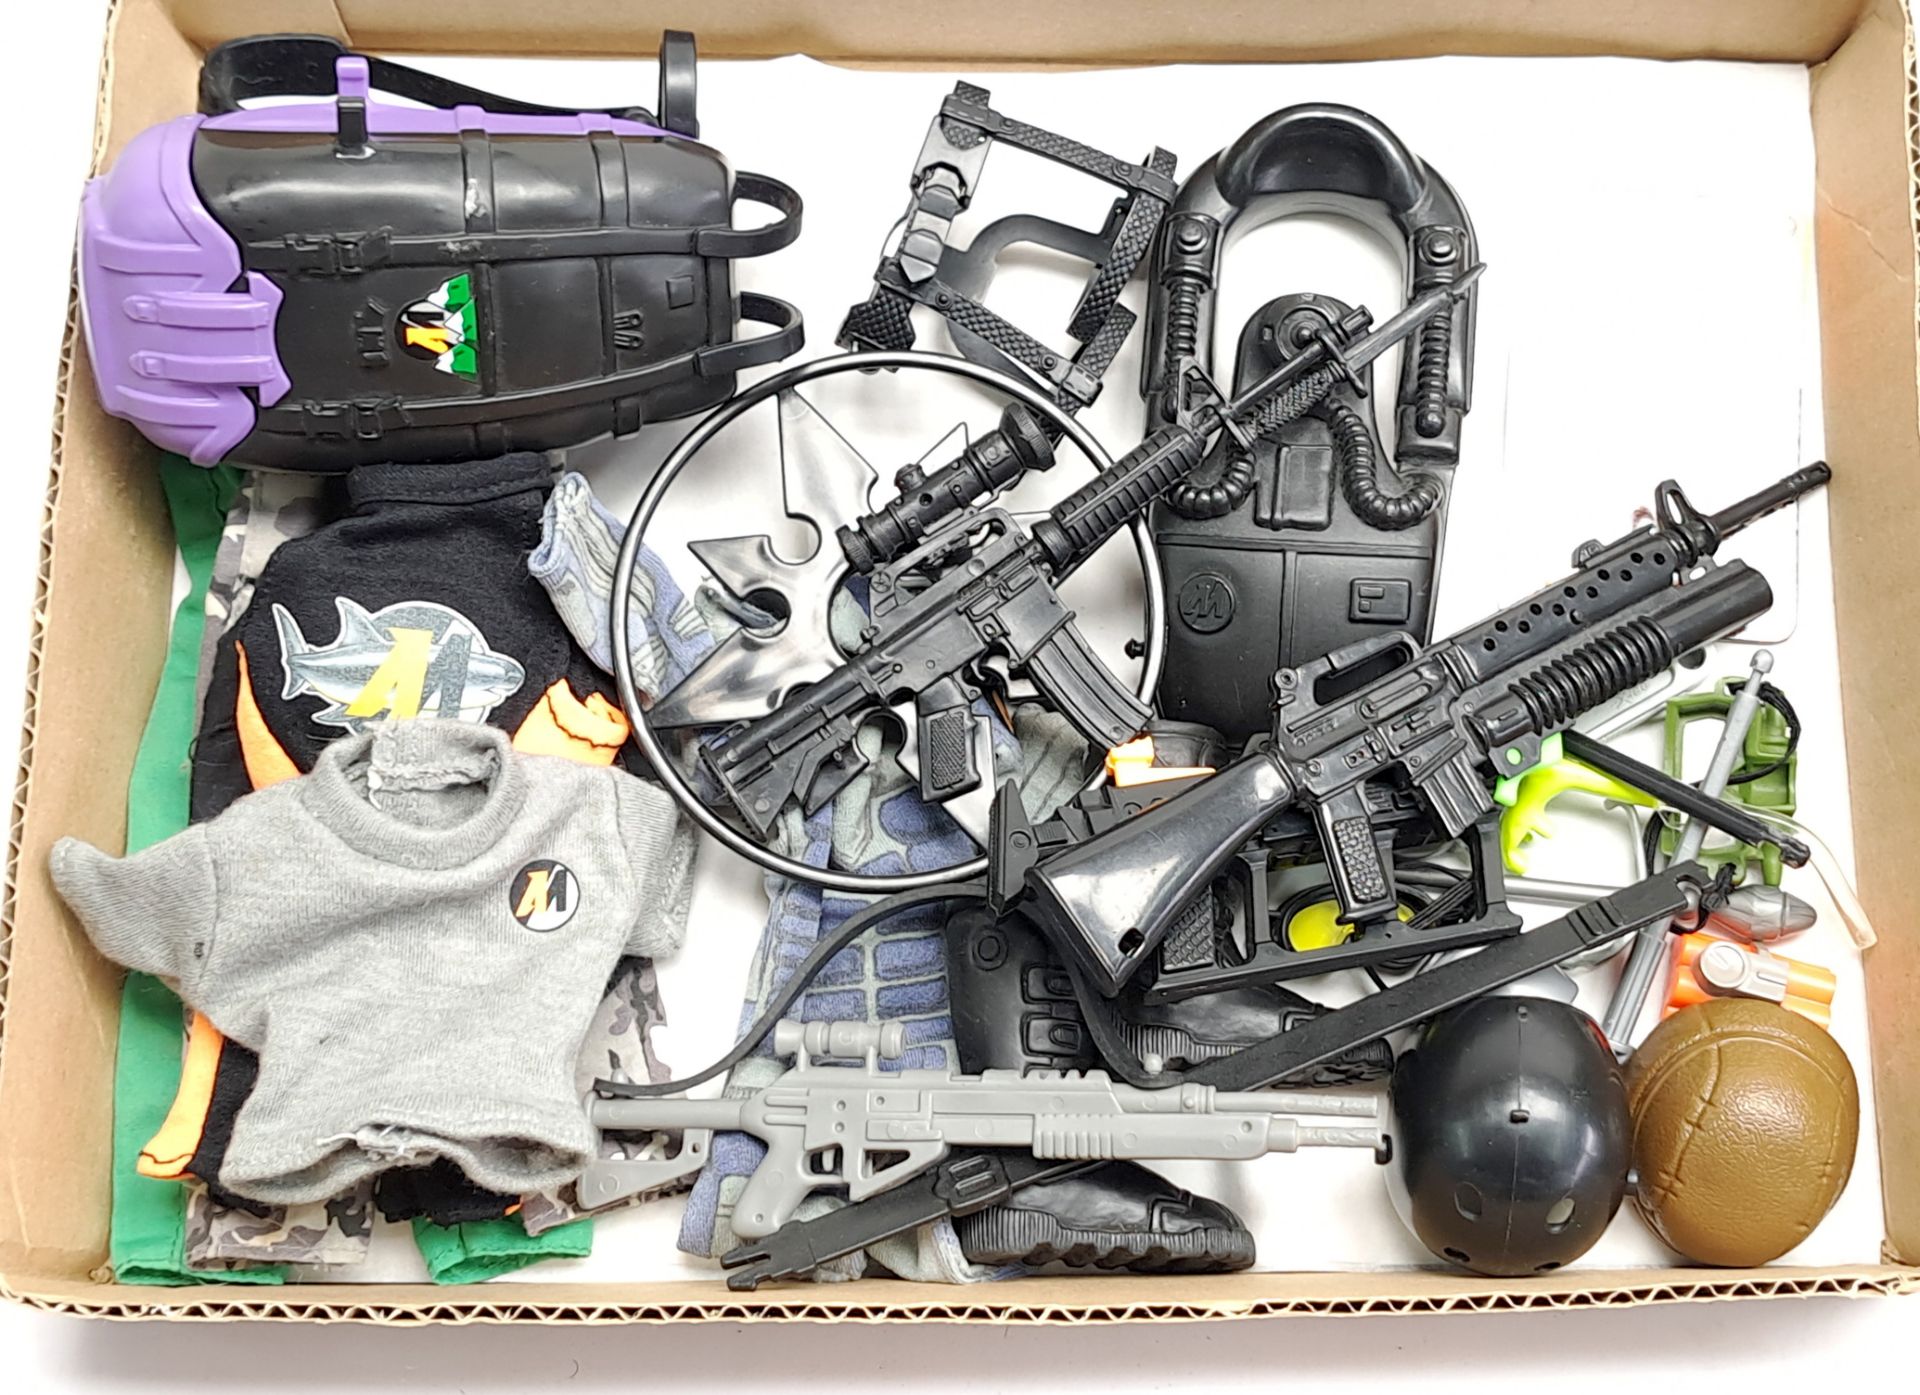 Hasbro modern Action Man, loose figures, part uniforms, weapons, ammo/kit storage box - not check... - Image 2 of 2